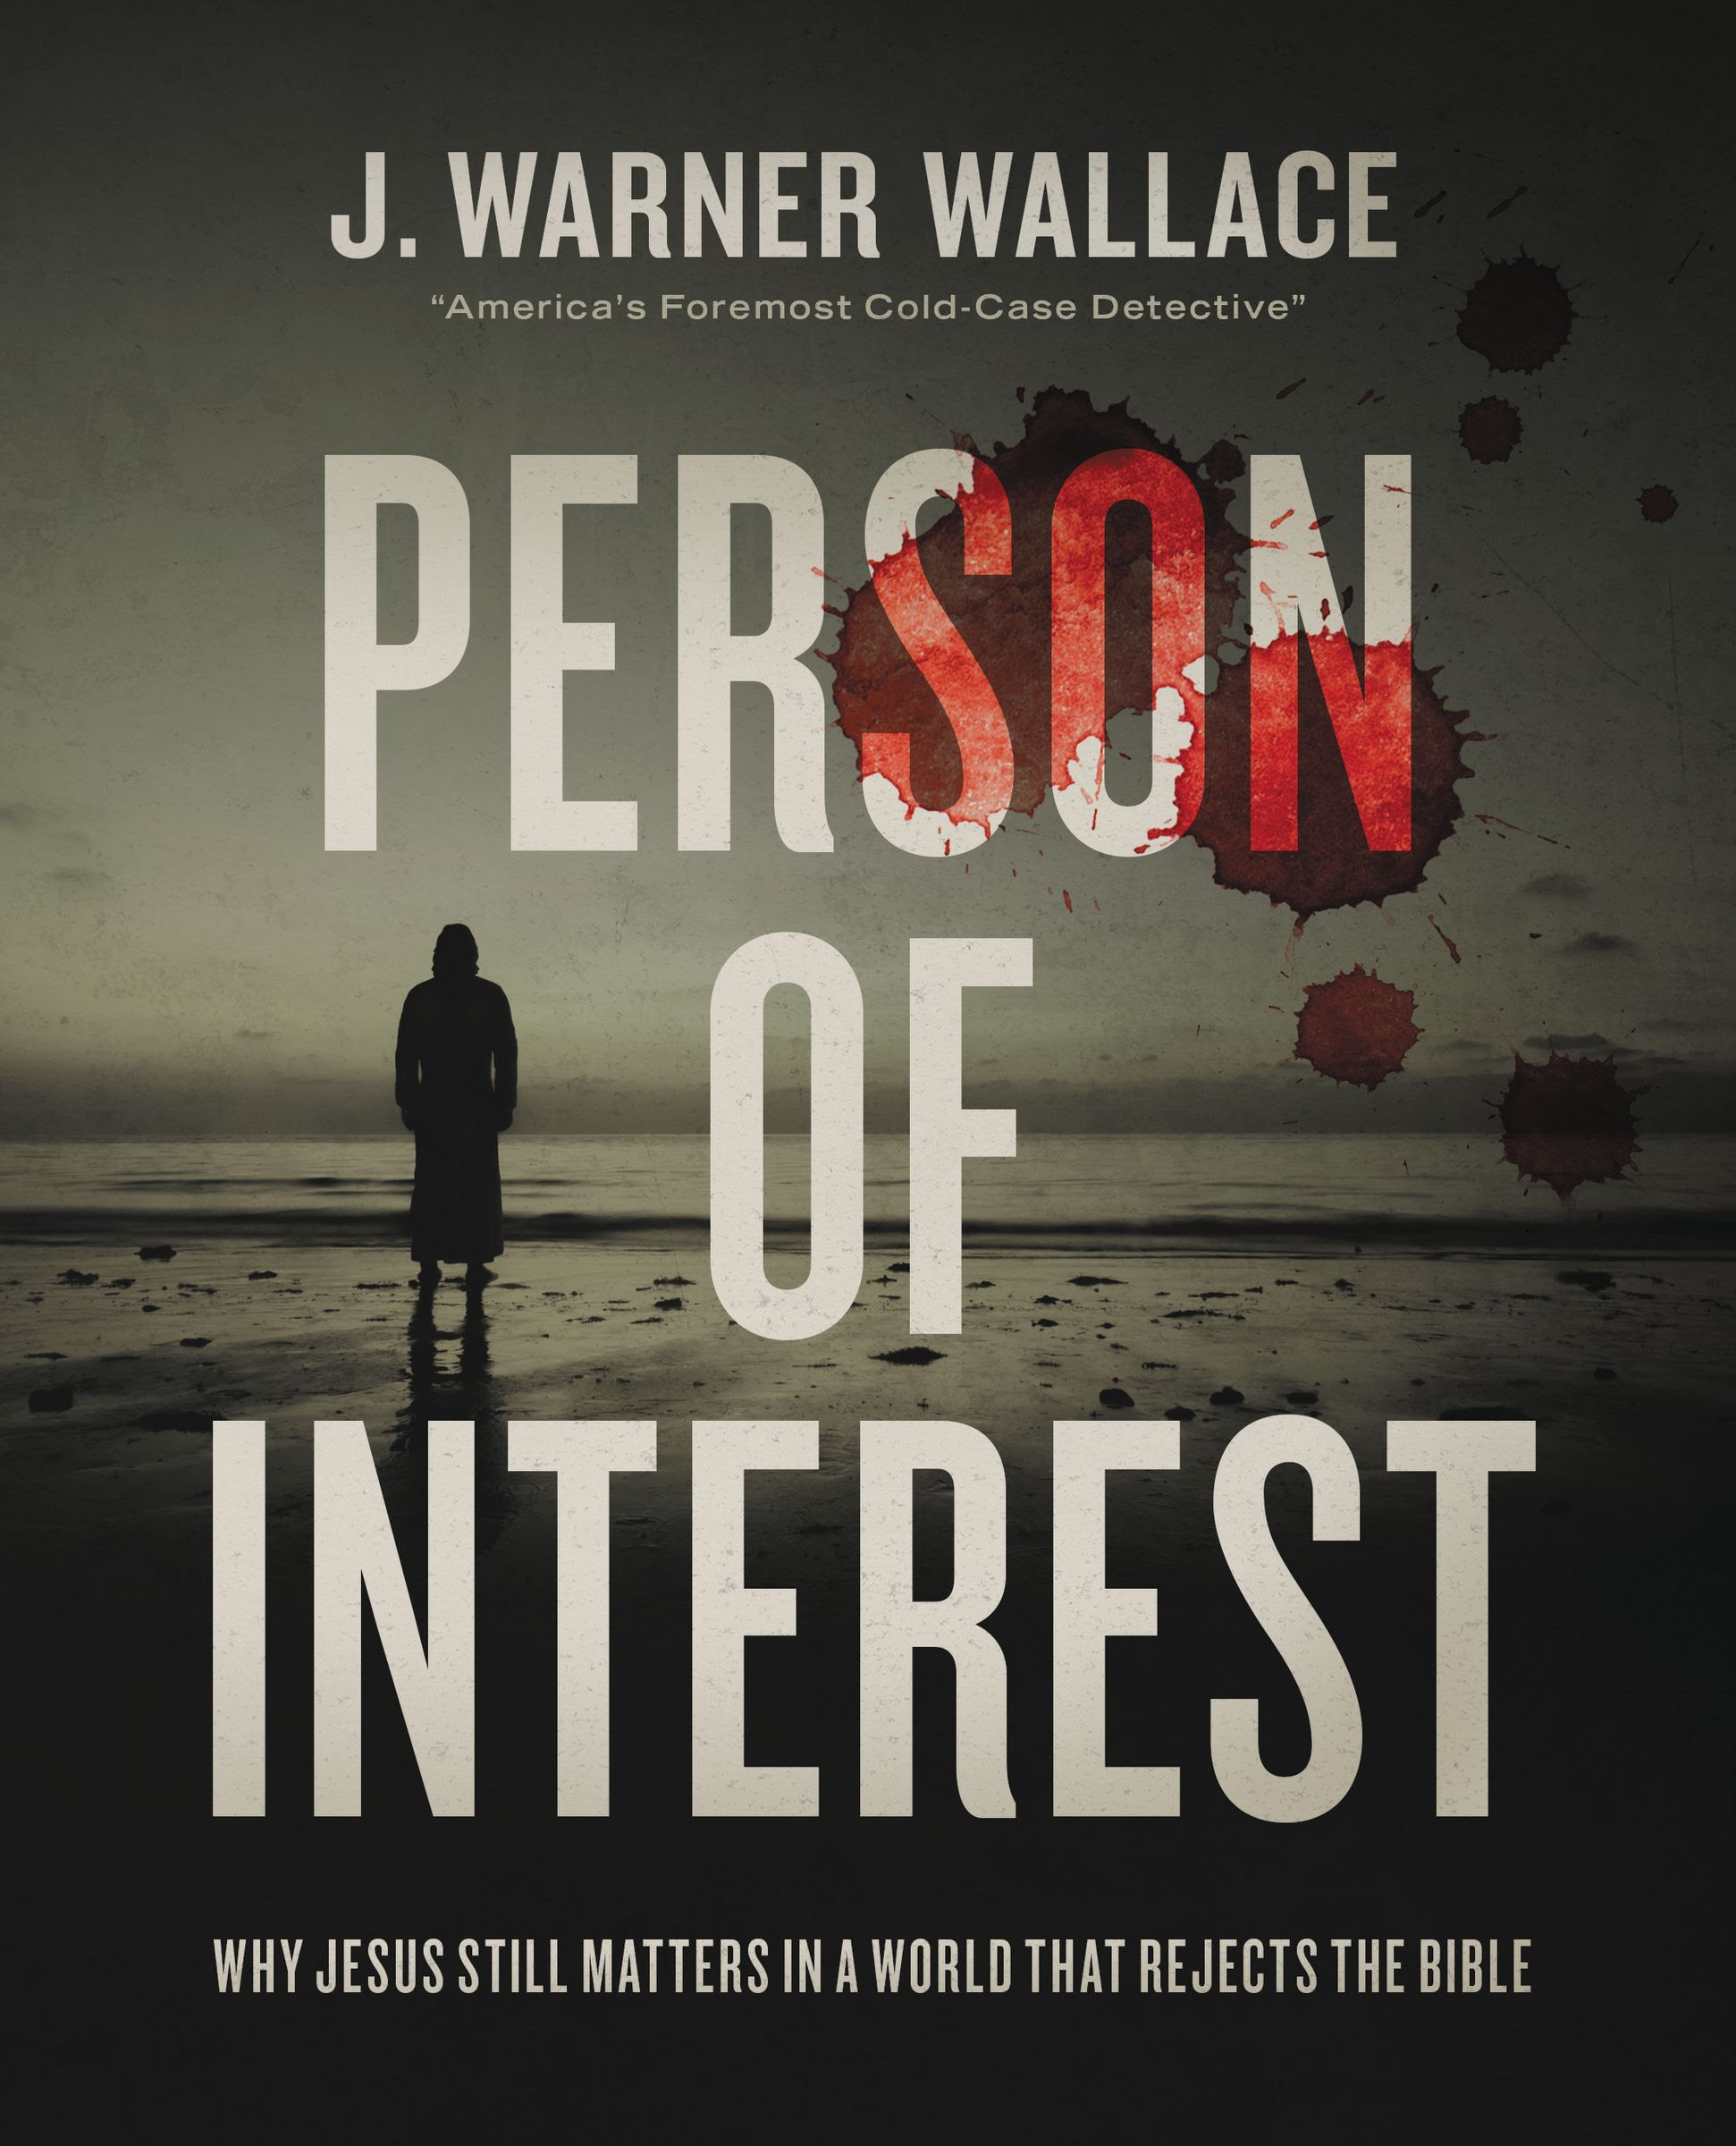 Person of Interest: Why Jesus Still Matters in a World that Rejects the Bible PDF